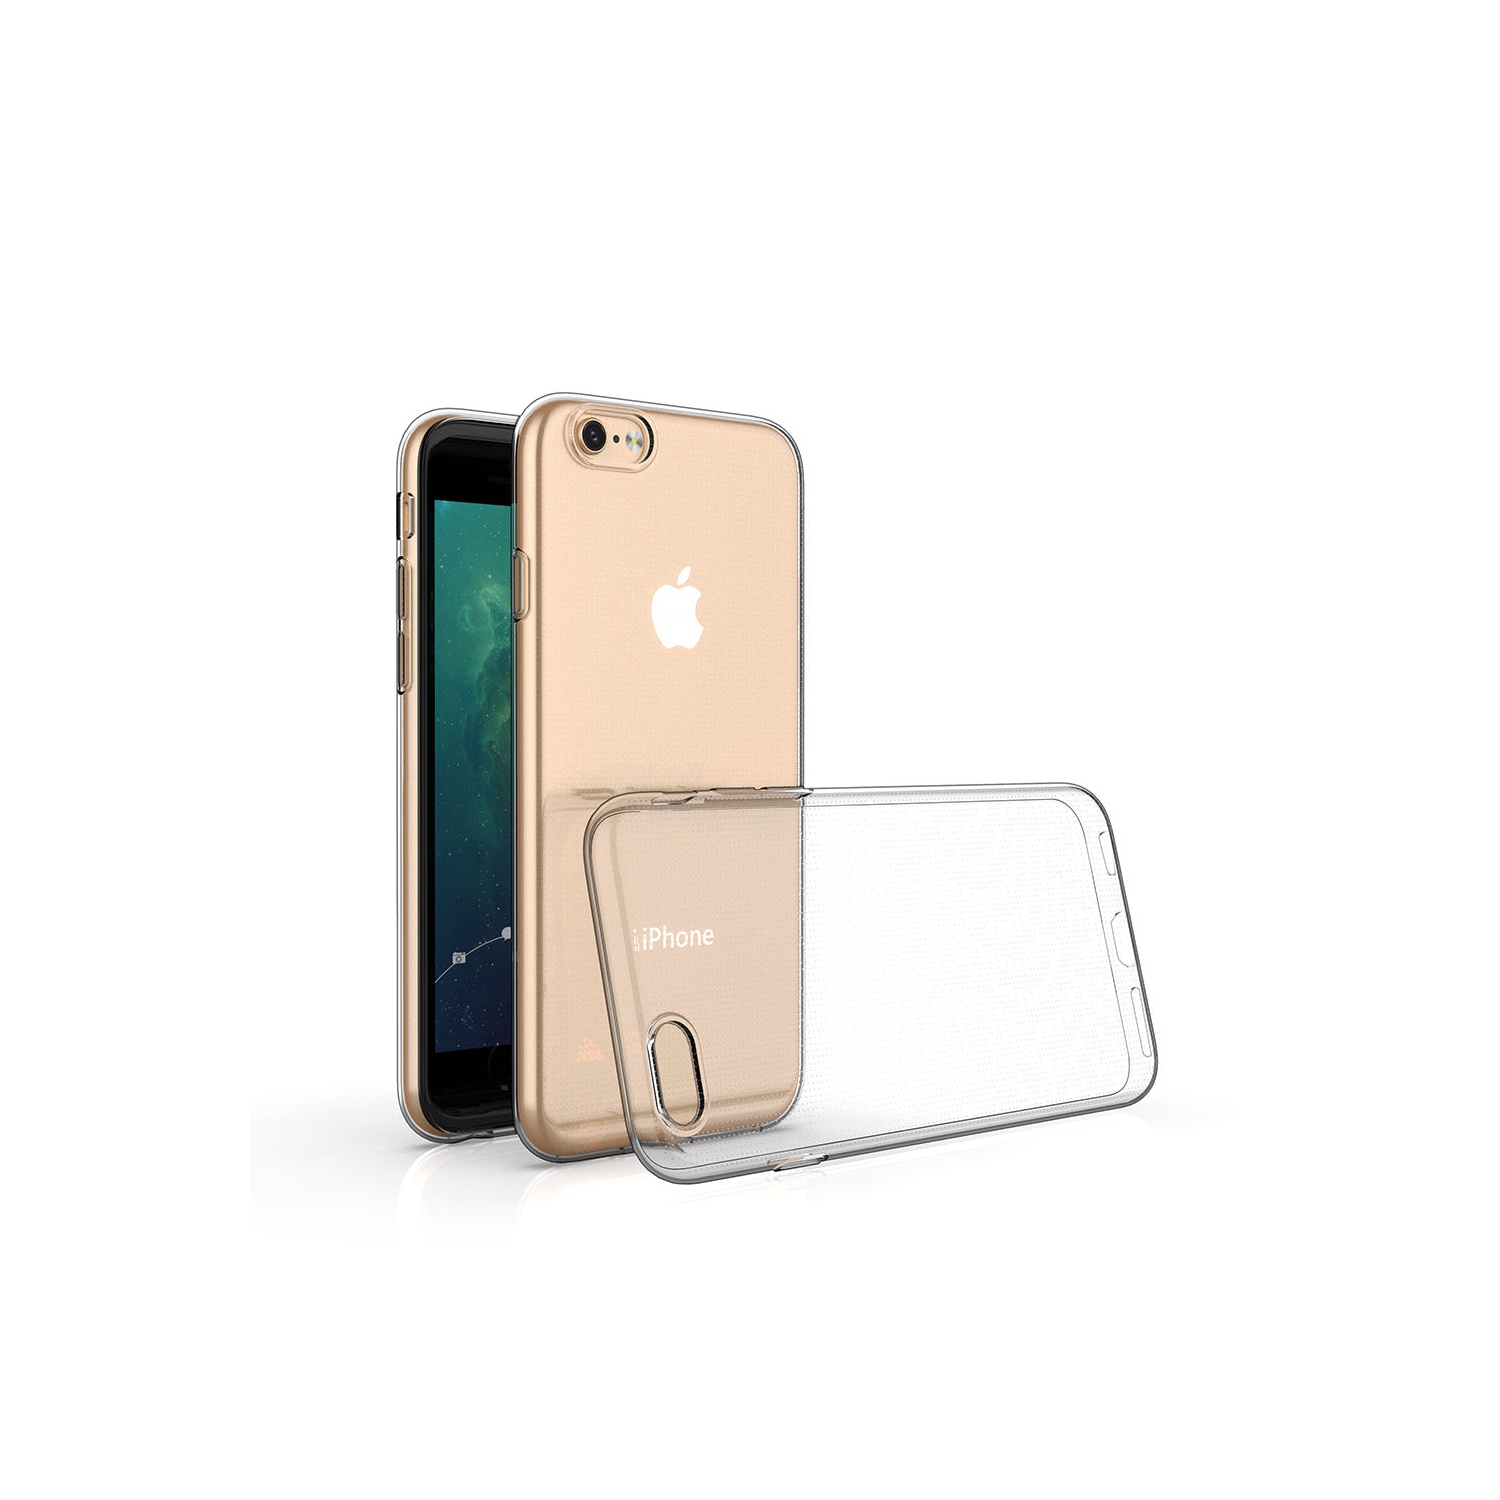 PANDACO Clear Case for iPhone 6 or iPhone 6S